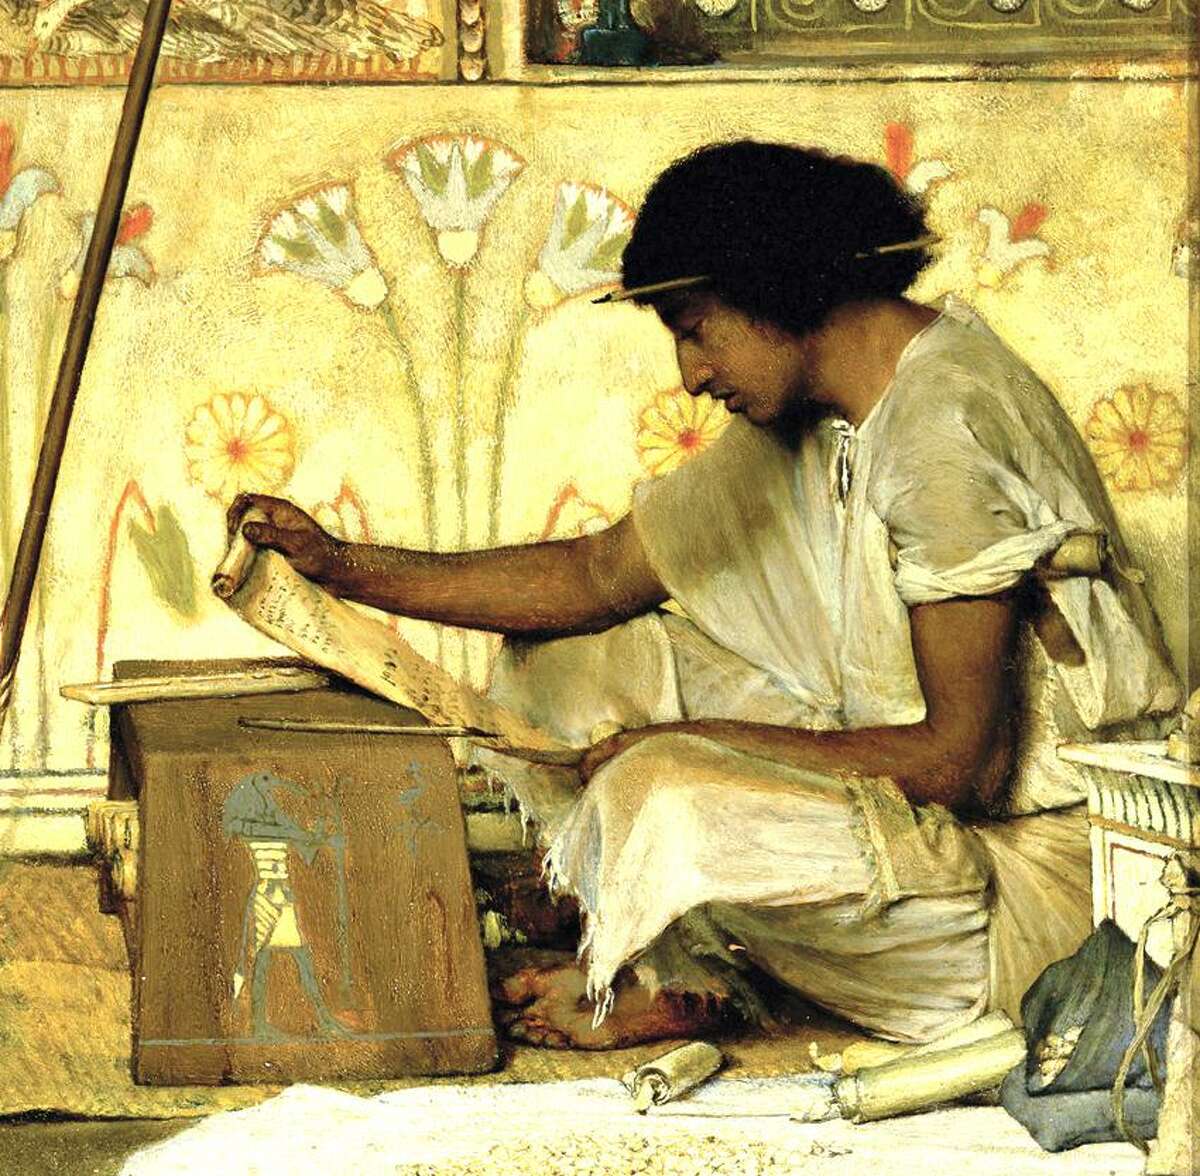 The Dahesh Museum of Art: Detail of "Joseph, Overseer of Pharaoh's Granaries," an oil by Lawrence Alma Tadema.